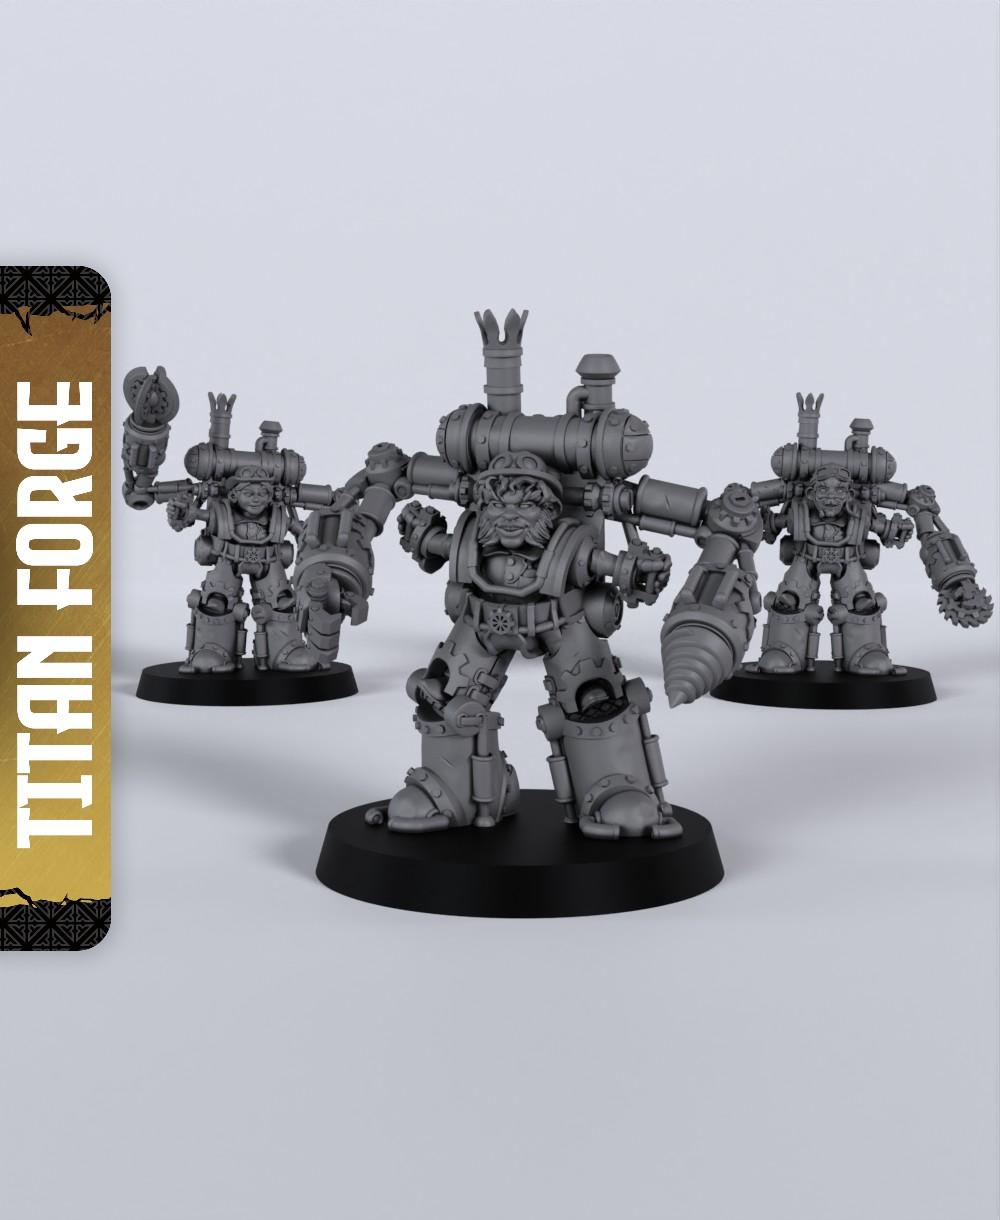 Mecha Gnomes - With Free Dragon Warhammer - 5e DnD Inspired for RPG and Wargamers 3d model